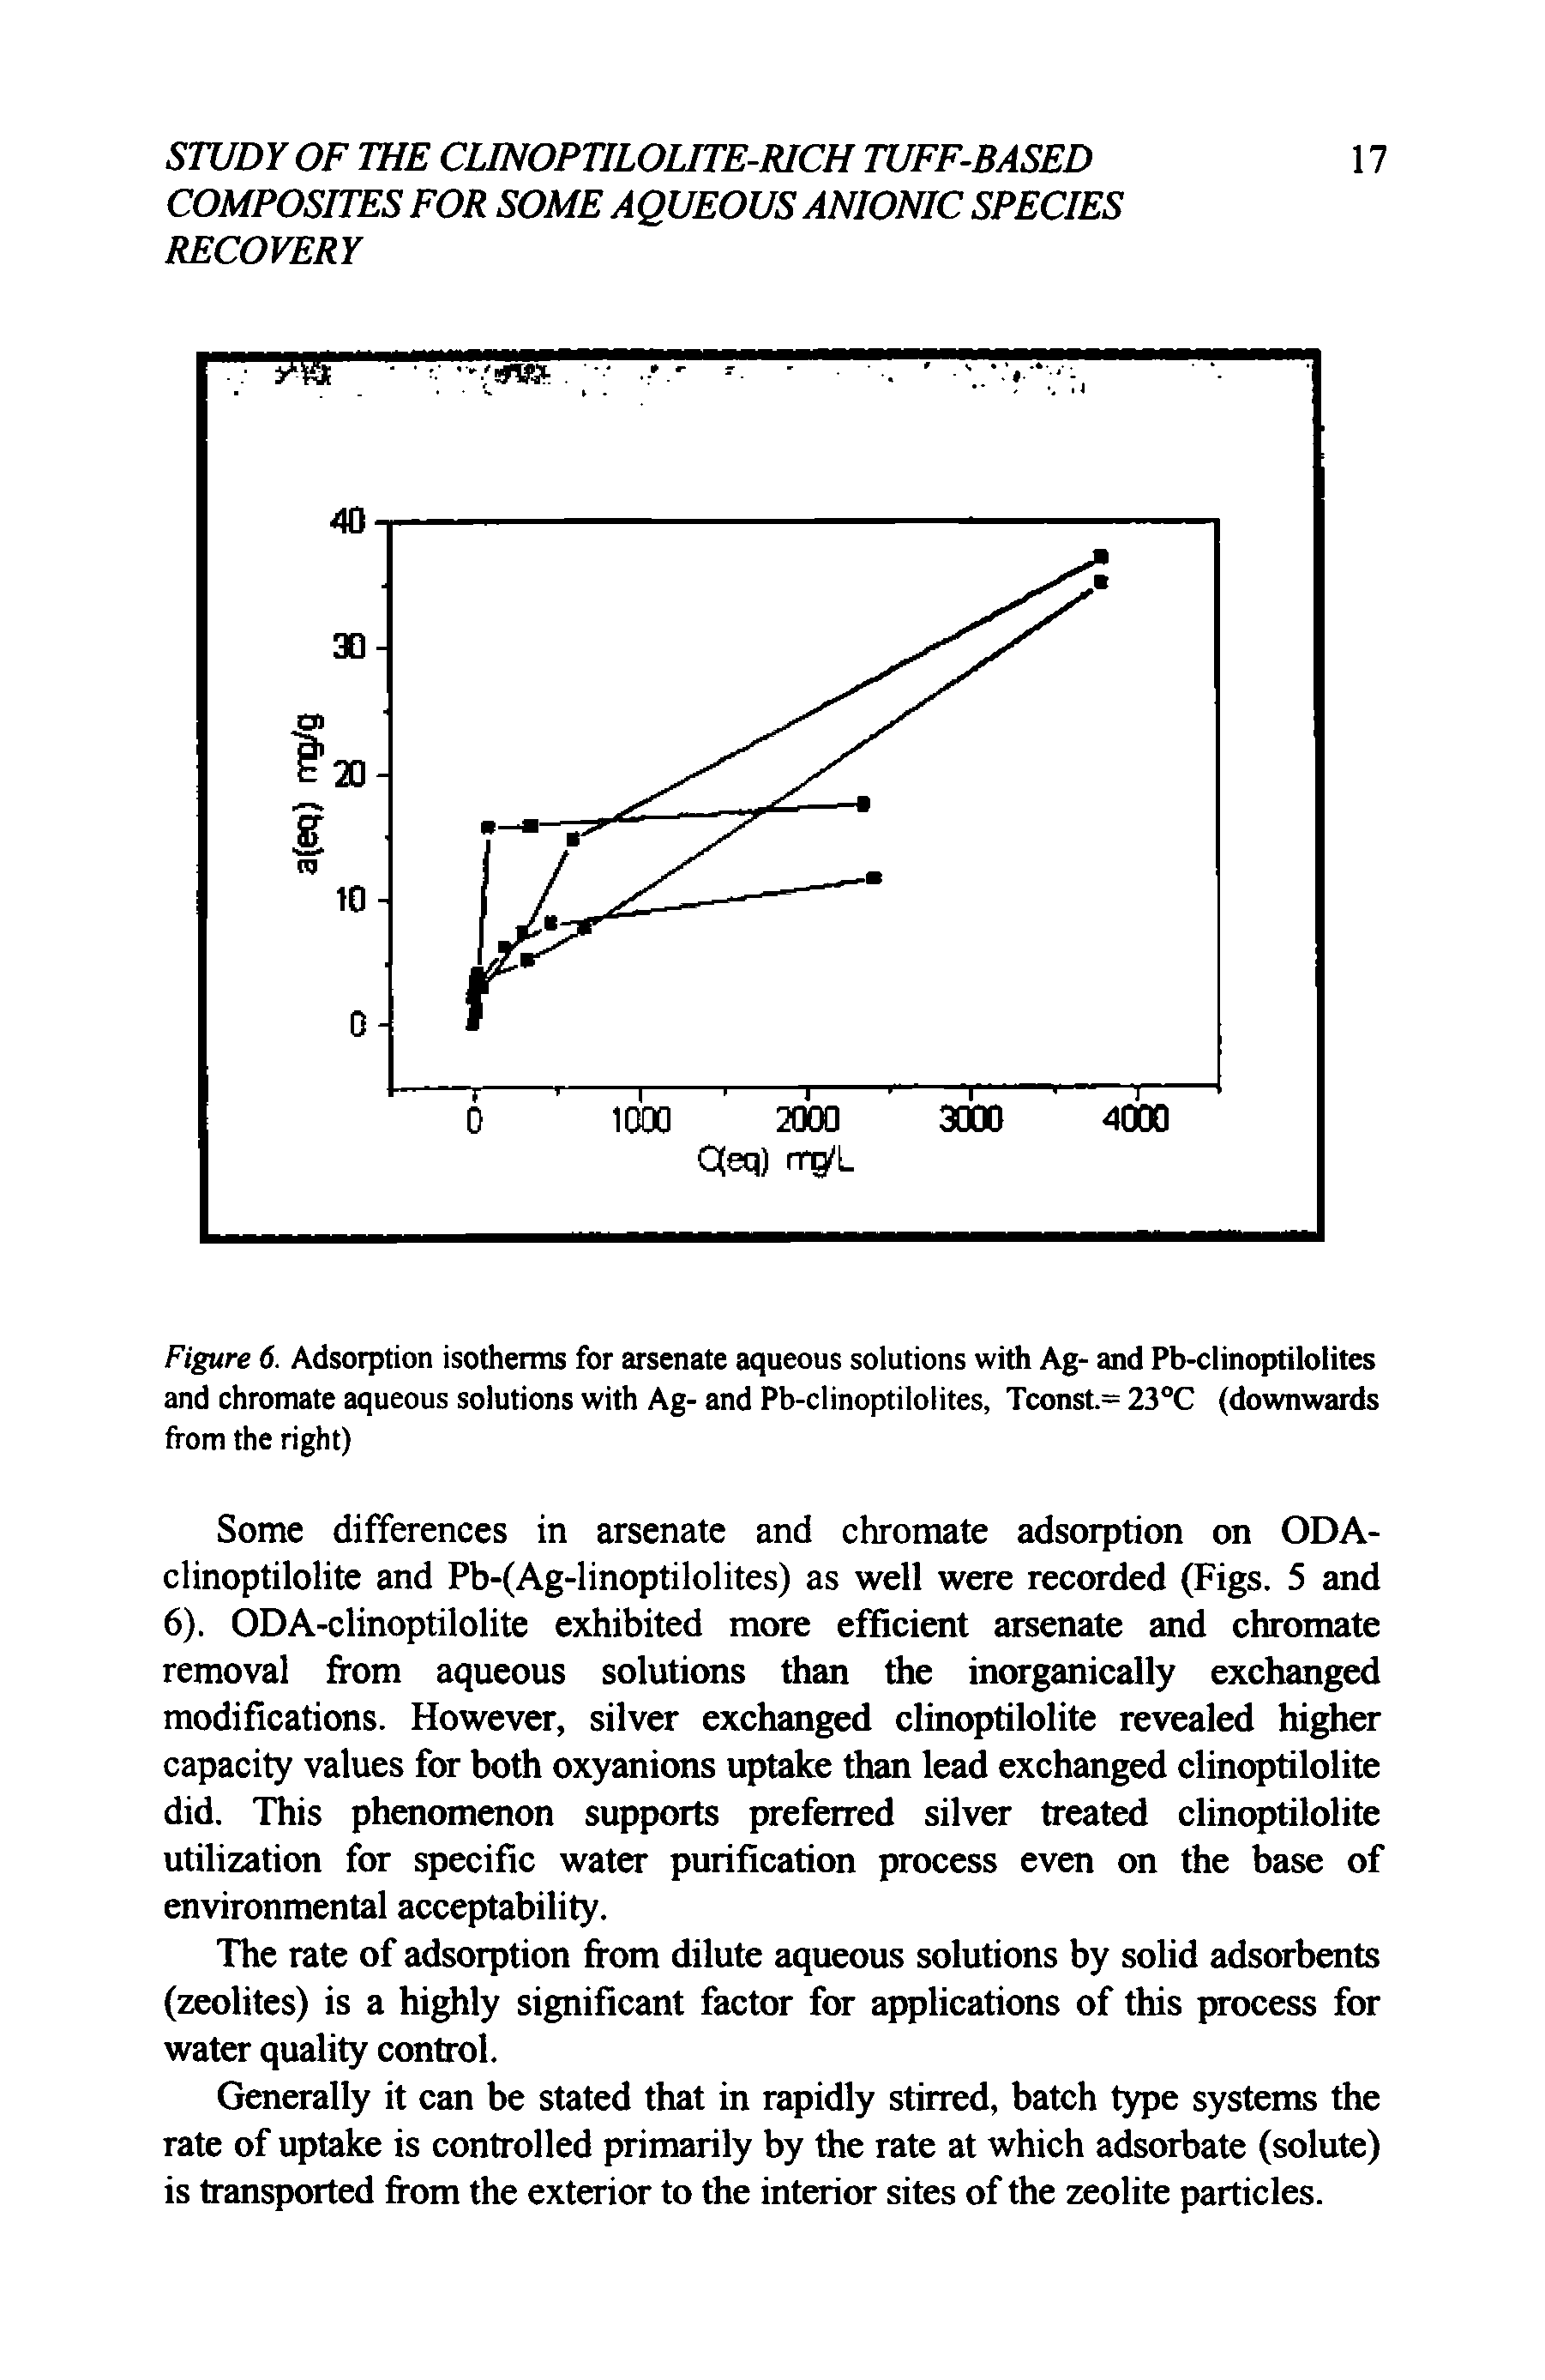 Figure 6. Adsorption isotherms for arsenate aqueous solutions with Ag- and Pb-clinoptilolites and chromate aqueous solutions with Ag- and Pb-clinoptilolites, Tconst.= 23°C (downwards from the right)...